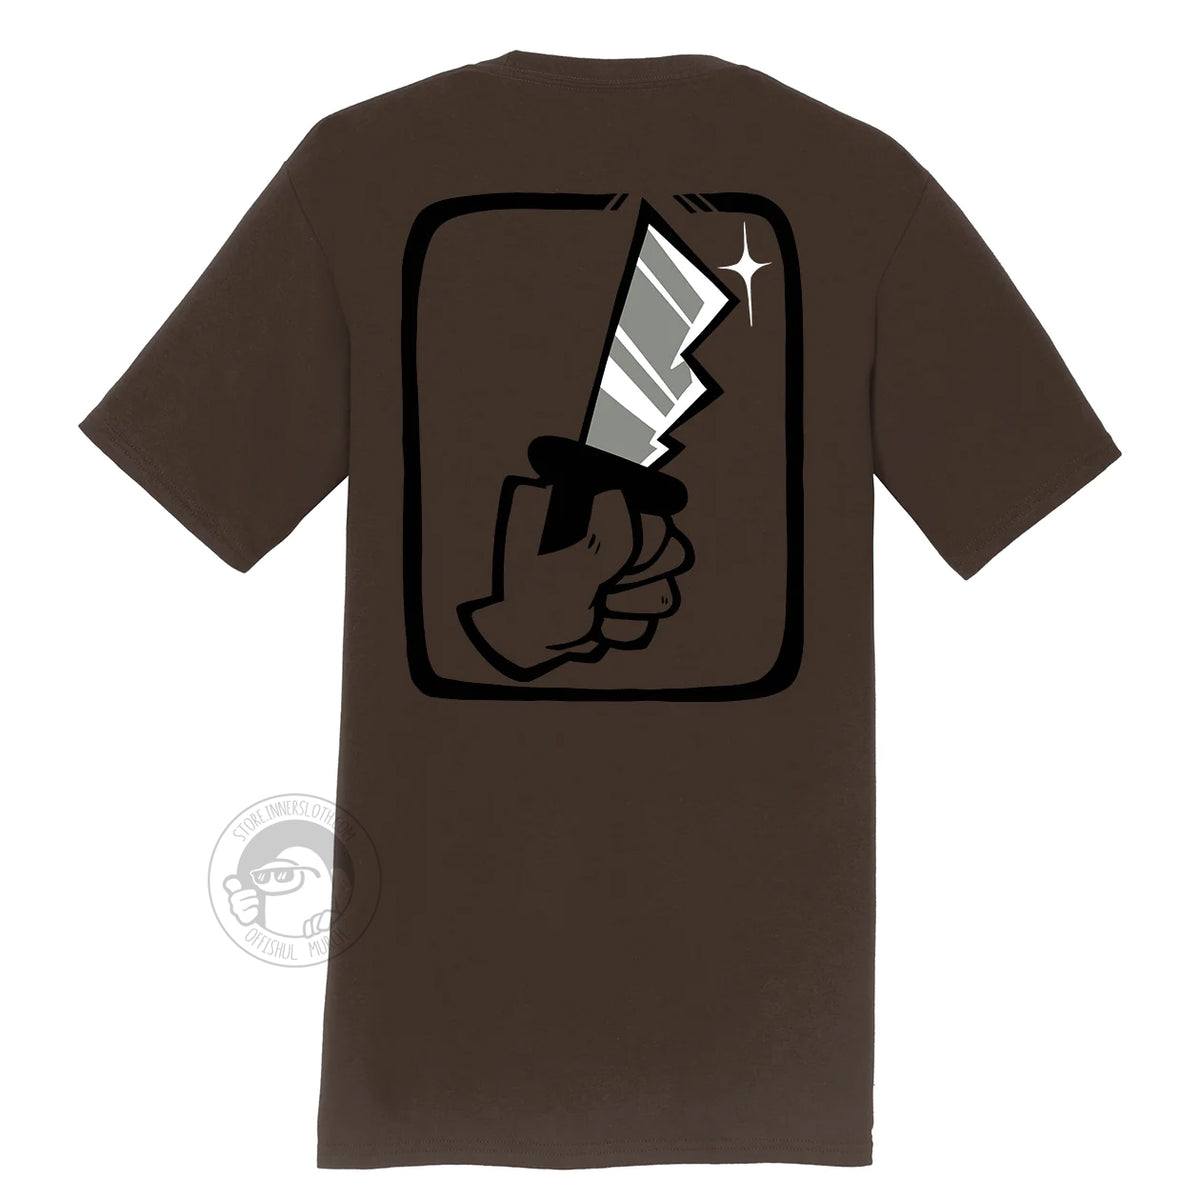 A product photo of the back of the Among Us: Shhhirt in brown. The back art is a large hand holding a knife.